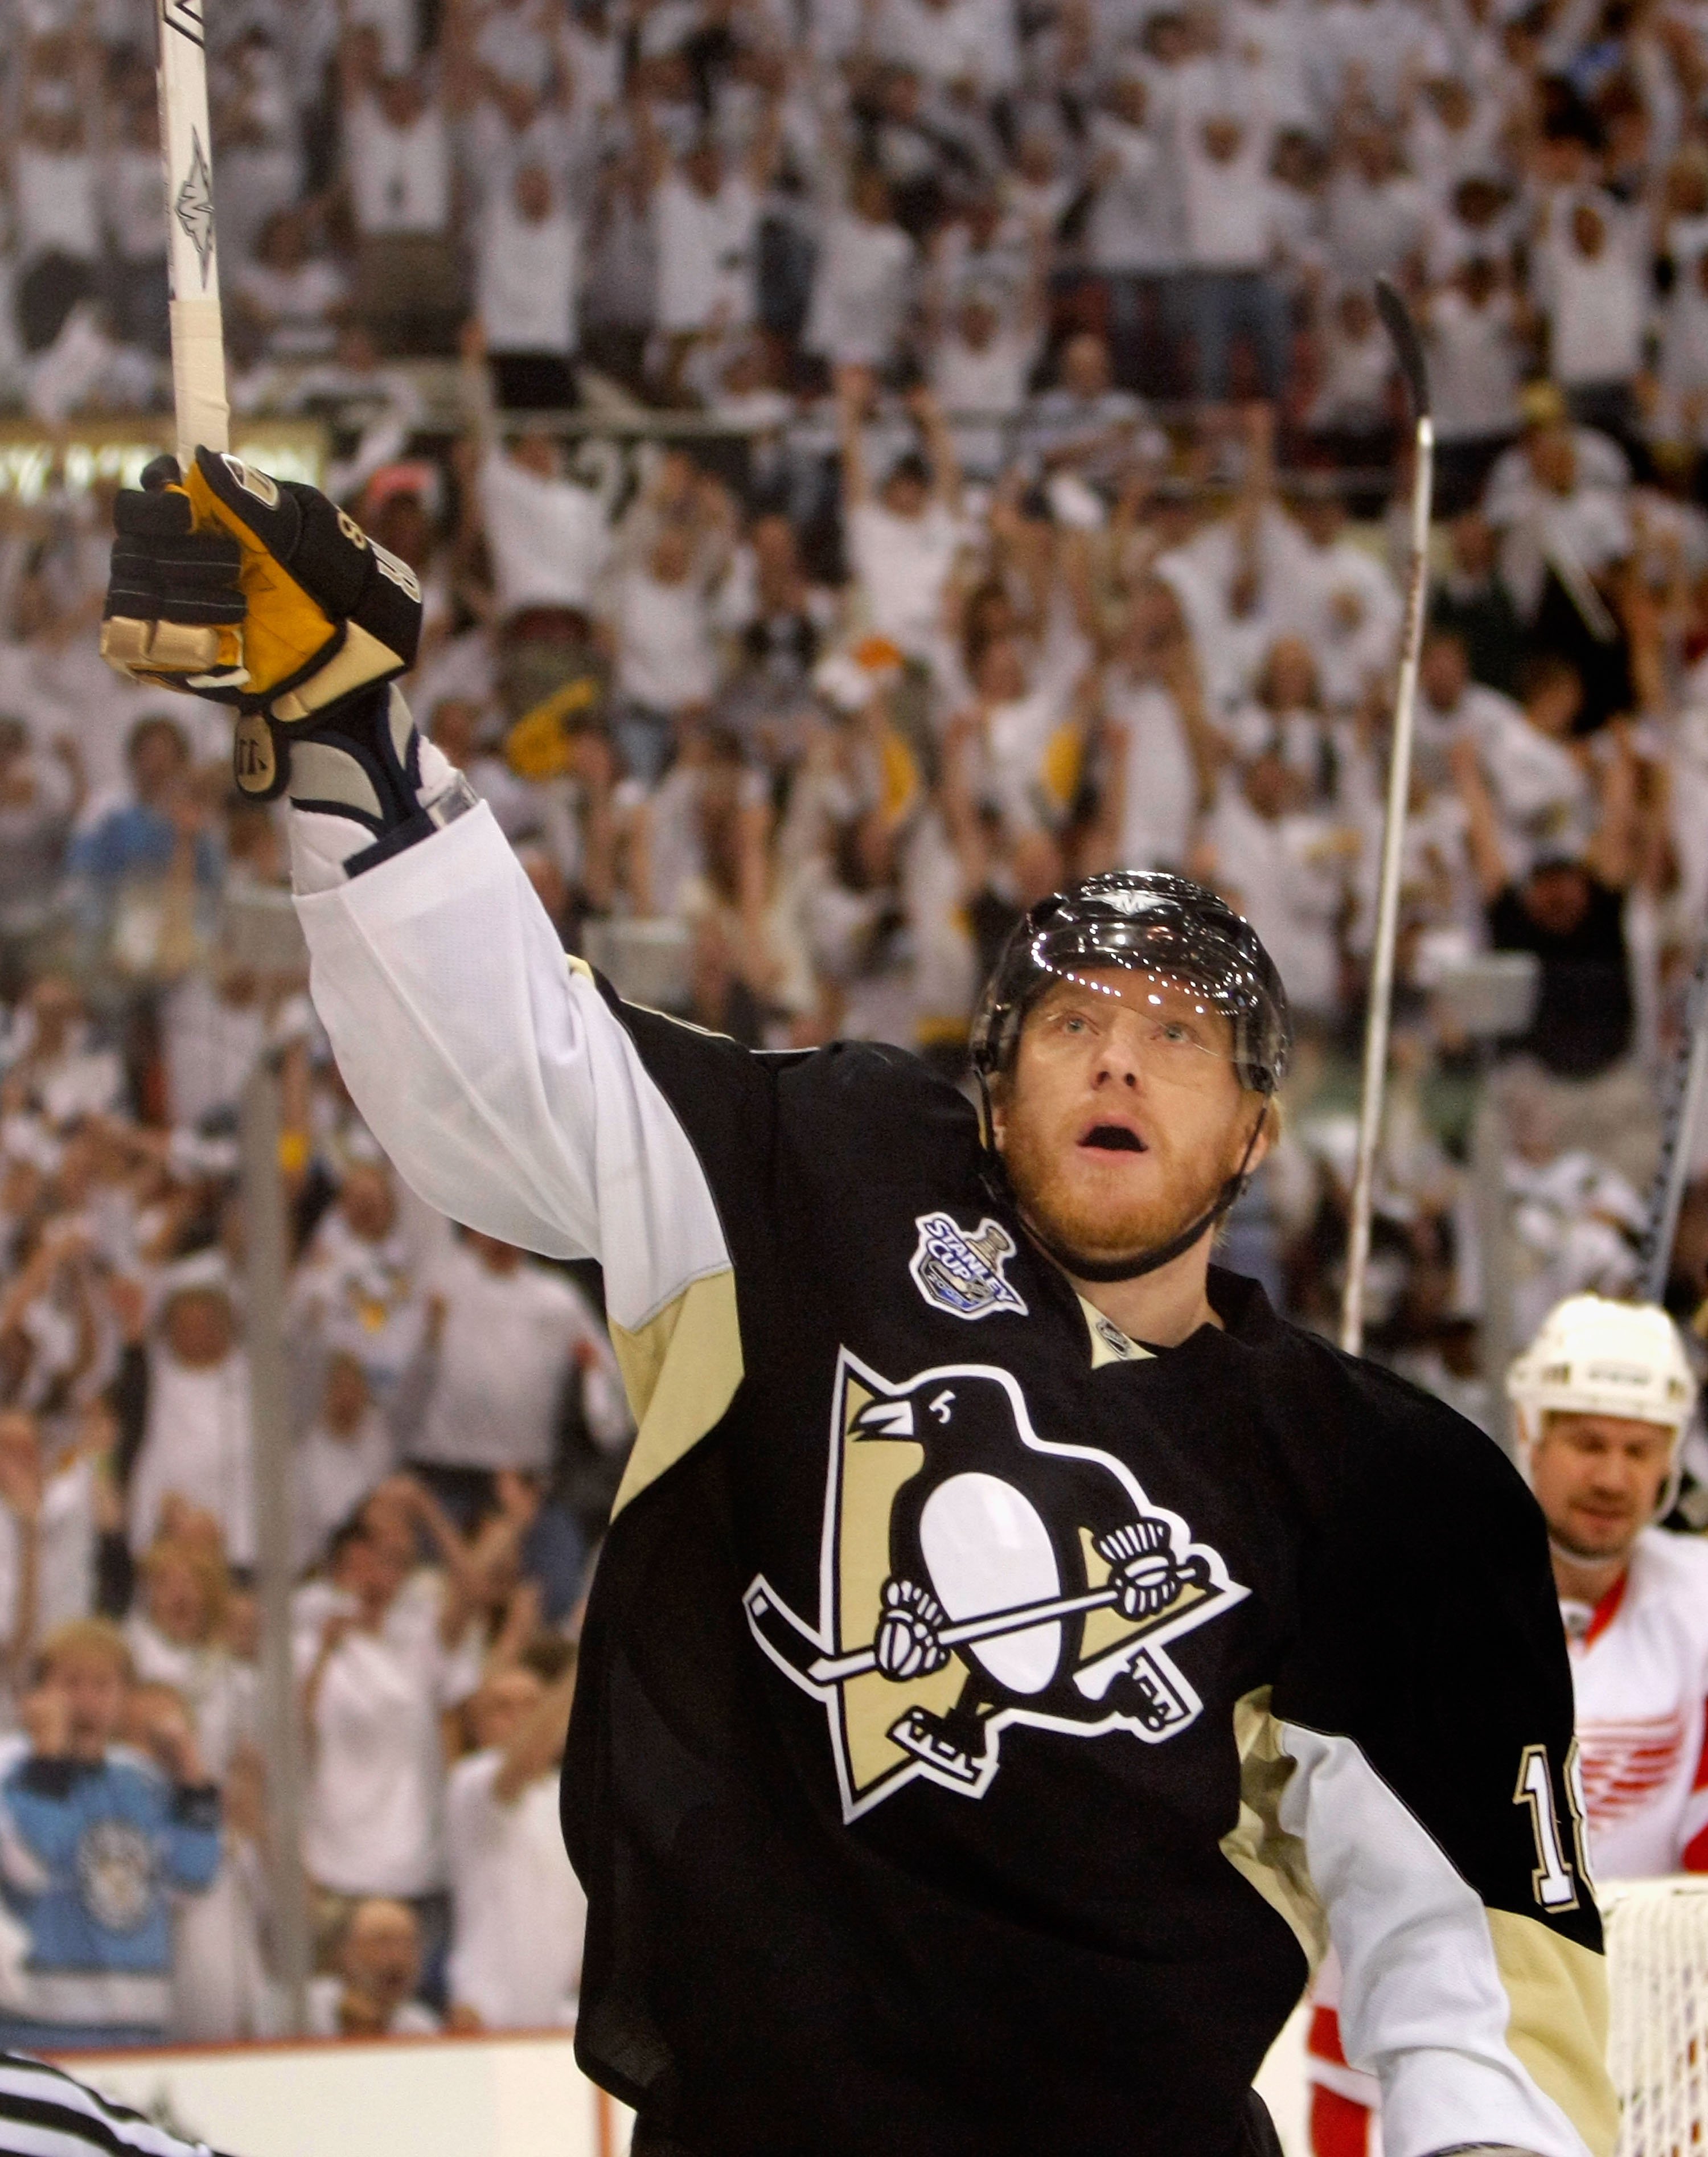 PITTSBURGH - MAY 31:  Marian Hossa #18 of the Pittsburgh Penguins celebrates after scoring a first period power play goal against the Detroit Red Wings during game four of the 2008 NHL Stanley Cup Finals at Mellon Arena on May 31, 2008 in Pittsburgh. Penn